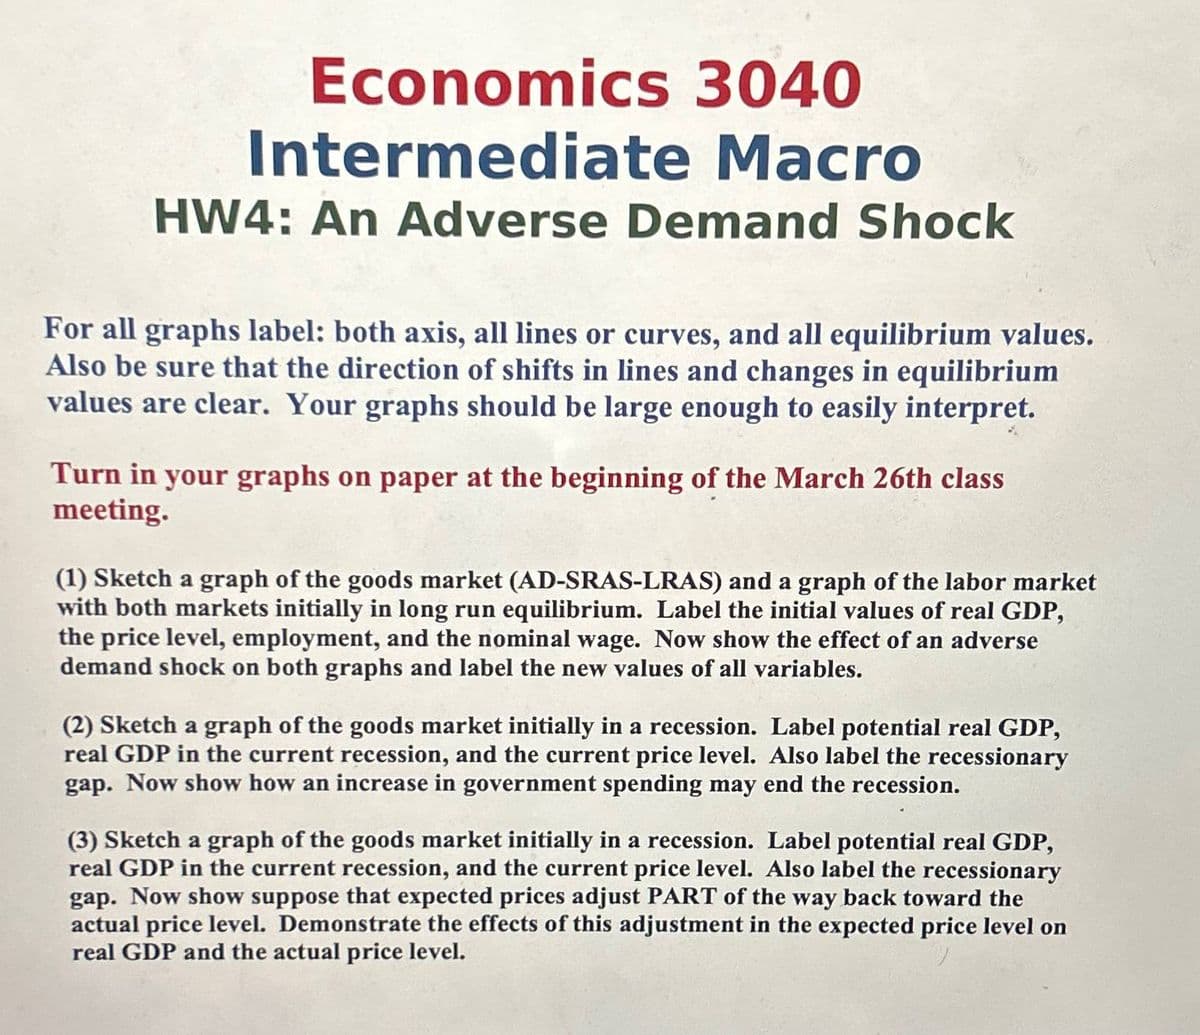 Economics 3040
Intermediate Macro
HW4: An Adverse Demand Shock
For all graphs label: both axis, all lines or curves, and all equilibrium values.
Also be sure that the direction of shifts in lines and changes in equilibrium
values are clear. Your graphs should be large enough to easily interpret.
Turn in your graphs on paper at the beginning of the March 26th class
meeting.
(1) Sketch a graph of the goods market (AD-SRAS-LRAS) and a graph of the labor market
with both markets initially in long run equilibrium. Label the initial values of real GDP,
the price level, employment, and the nominal wage. Now show the effect of an adverse
demand shock on both graphs and label the new values of all variables.
(2) Sketch a graph of the goods market initially in a recession. Label potential real GDP,
real GDP in the current recession, and the current price level. Also label the recessionary
gap. Now show how an increase in government spending may end the recession.
(3) Sketch a graph of the goods market initially in a recession. Label potential real GDP,
real GDP in the current recession, and the current price level. Also label the recessionary
gap. Now show suppose that expected prices adjust PART of the way back toward the
actual price level. Demonstrate the effects of this adjustment in the expected price level on
real GDP and the actual price level.